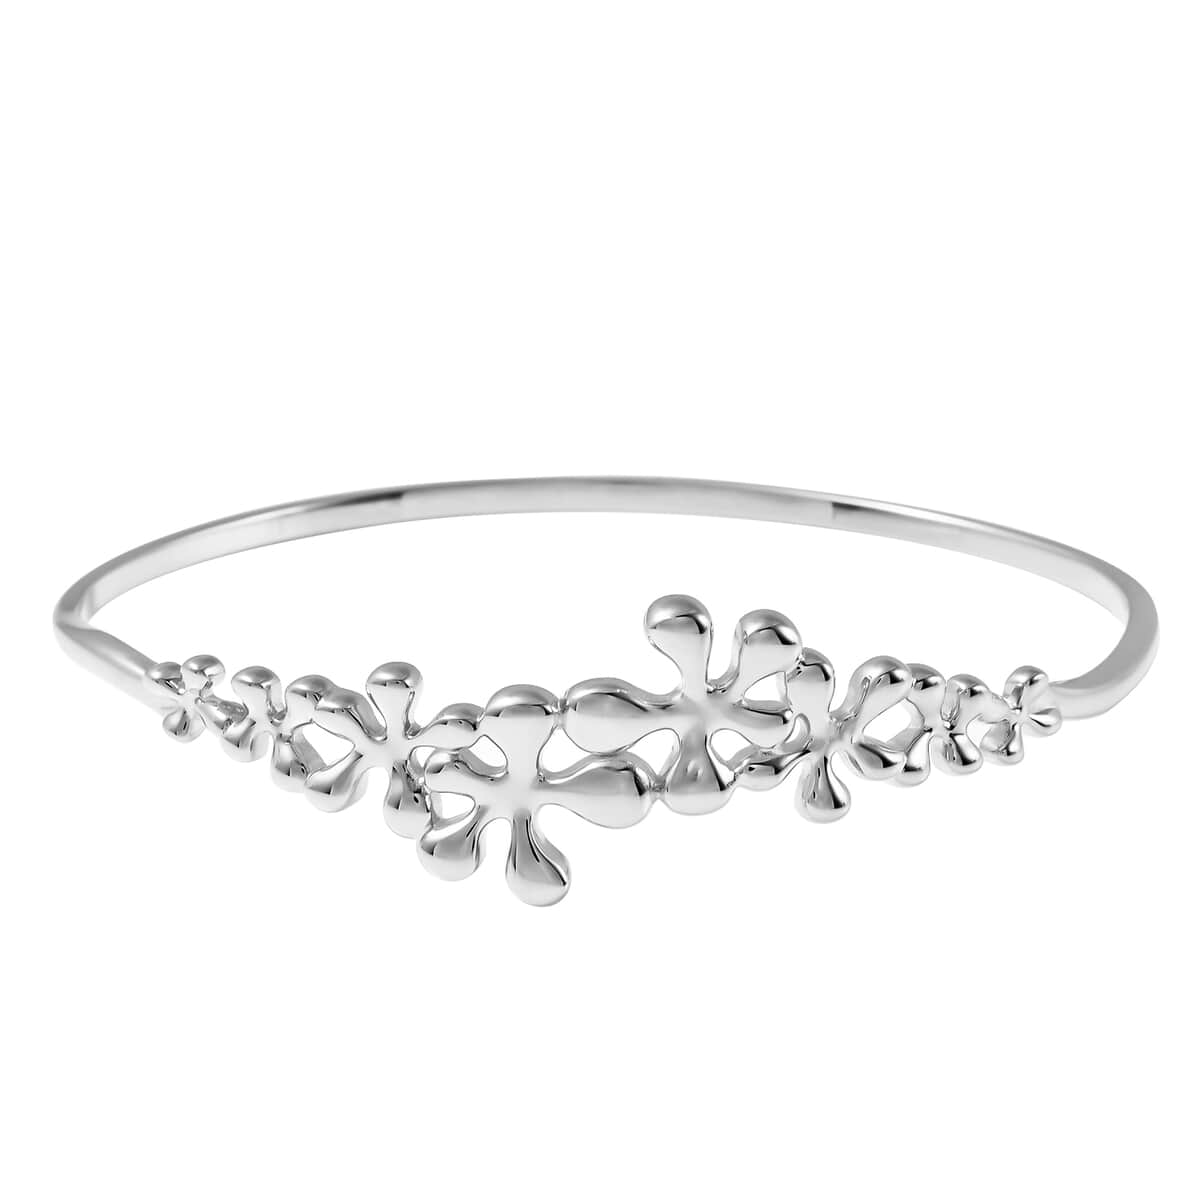 LucyQ Splash Collection Rhodium Over Sterling Silver Bangle Bracelet (7 in) 15 Grams image number 3